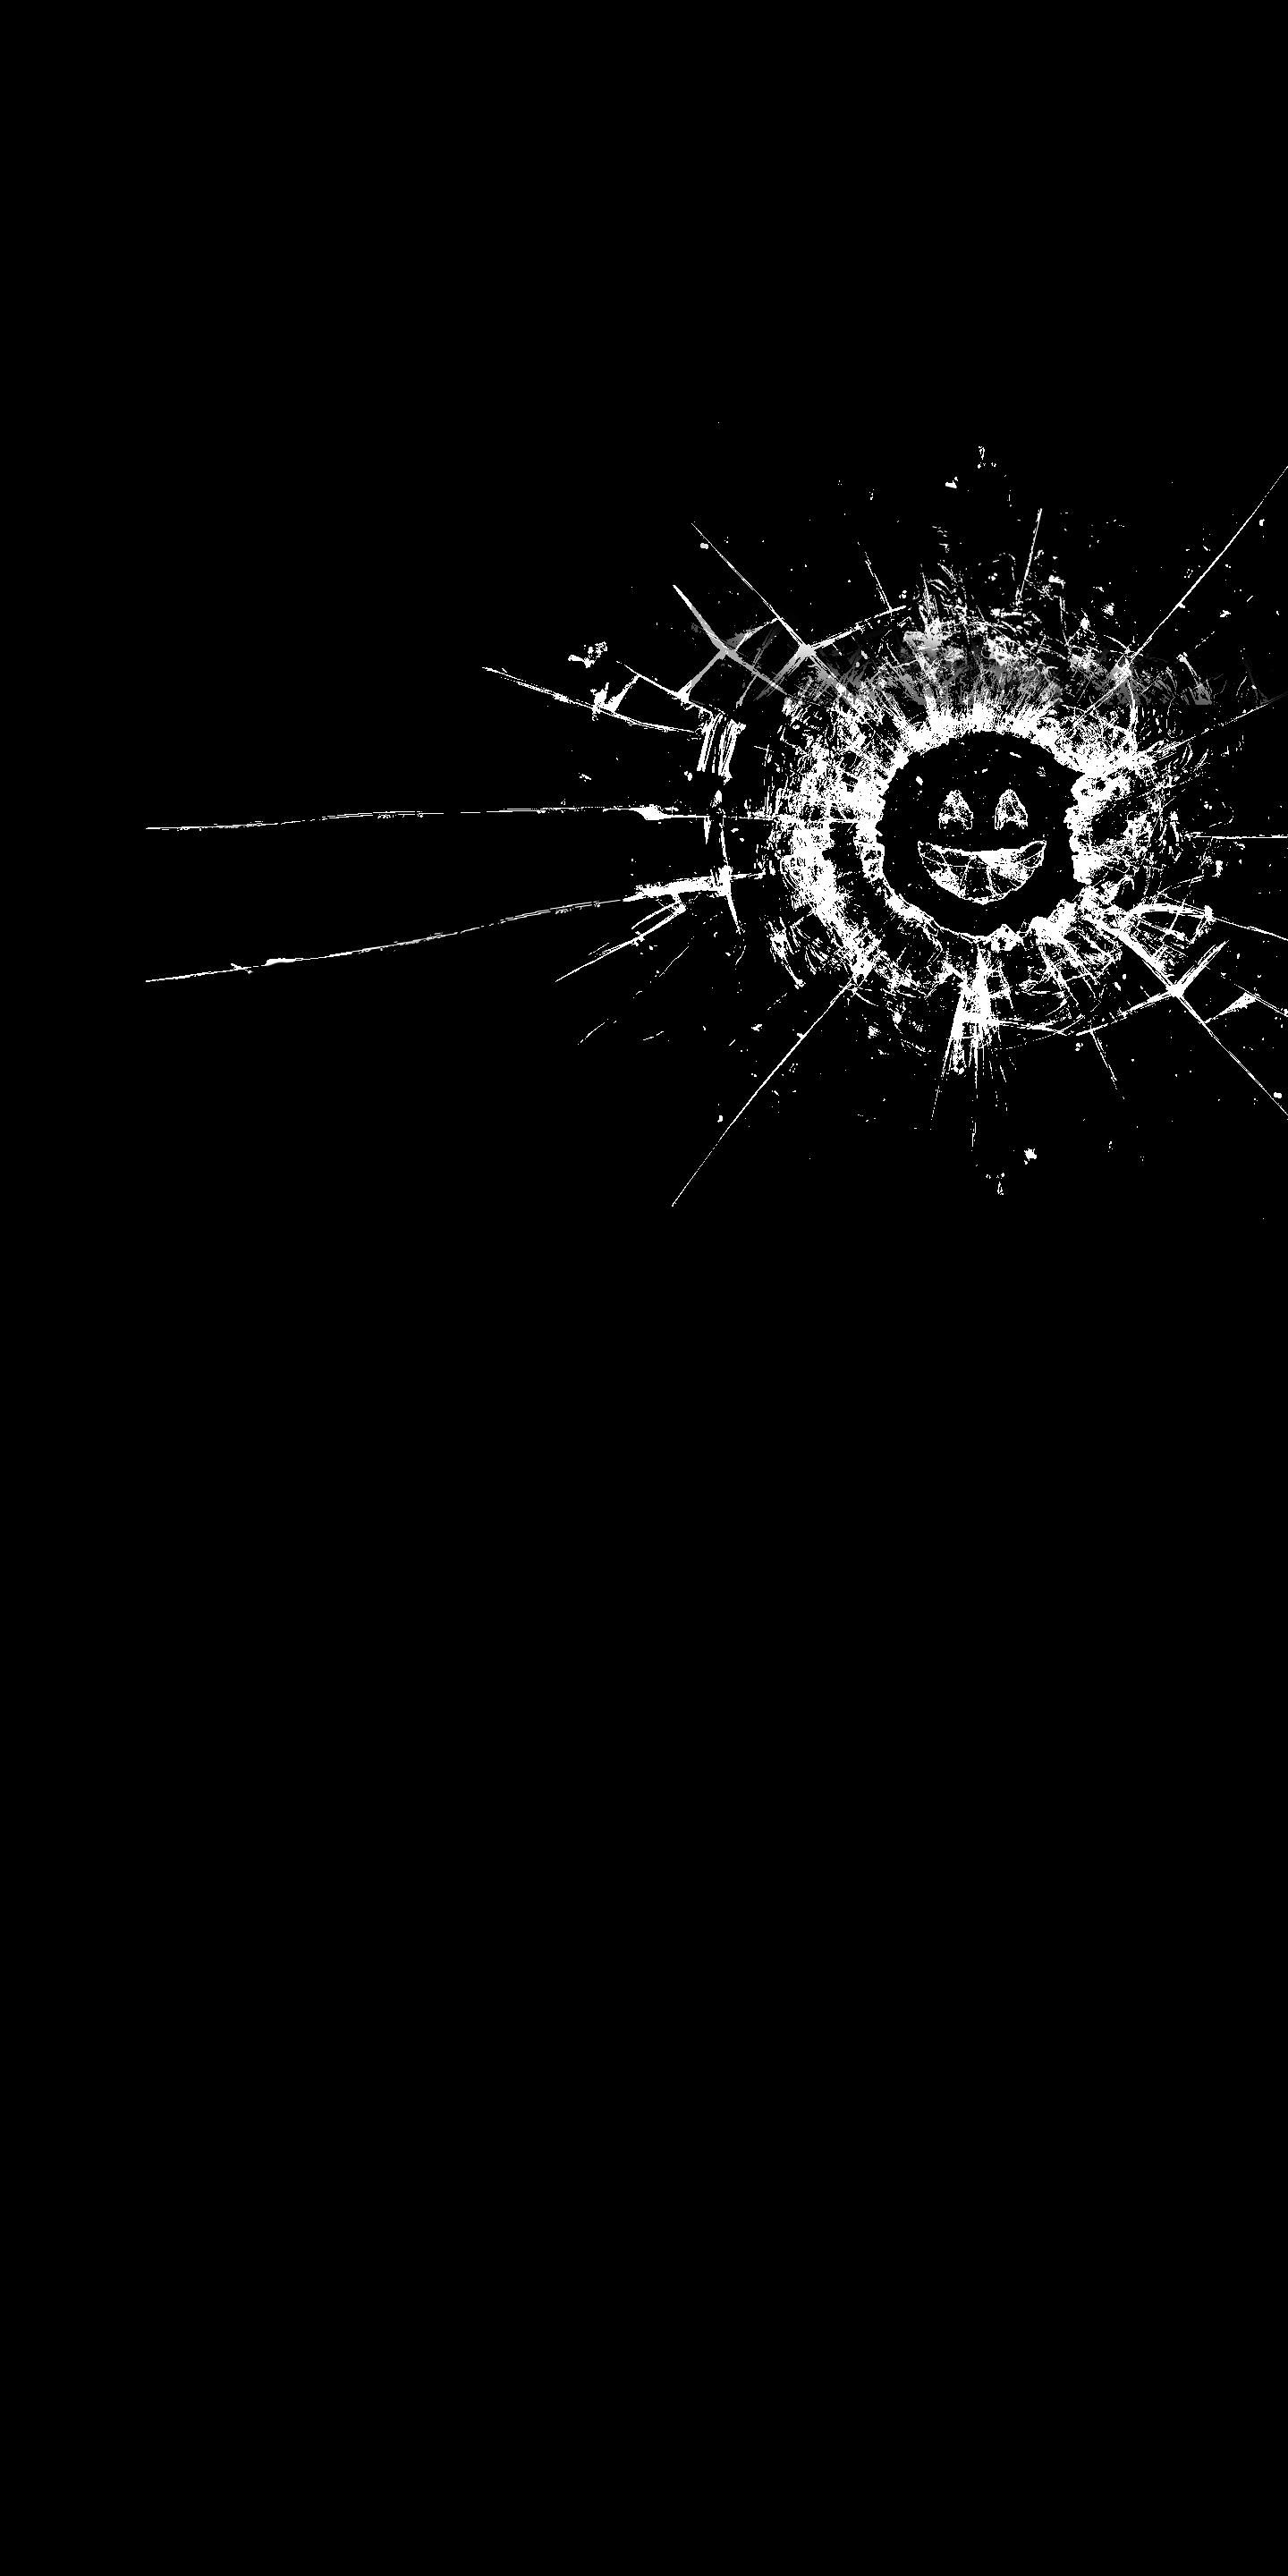 Amoled Black Mirror Logo (1440x2880) (i.redd.it) Submitted By Klubhead To R Amoledbackground 0 Comments Original. Mirror Logo, Black Mirror, Mirrored Wallpaper